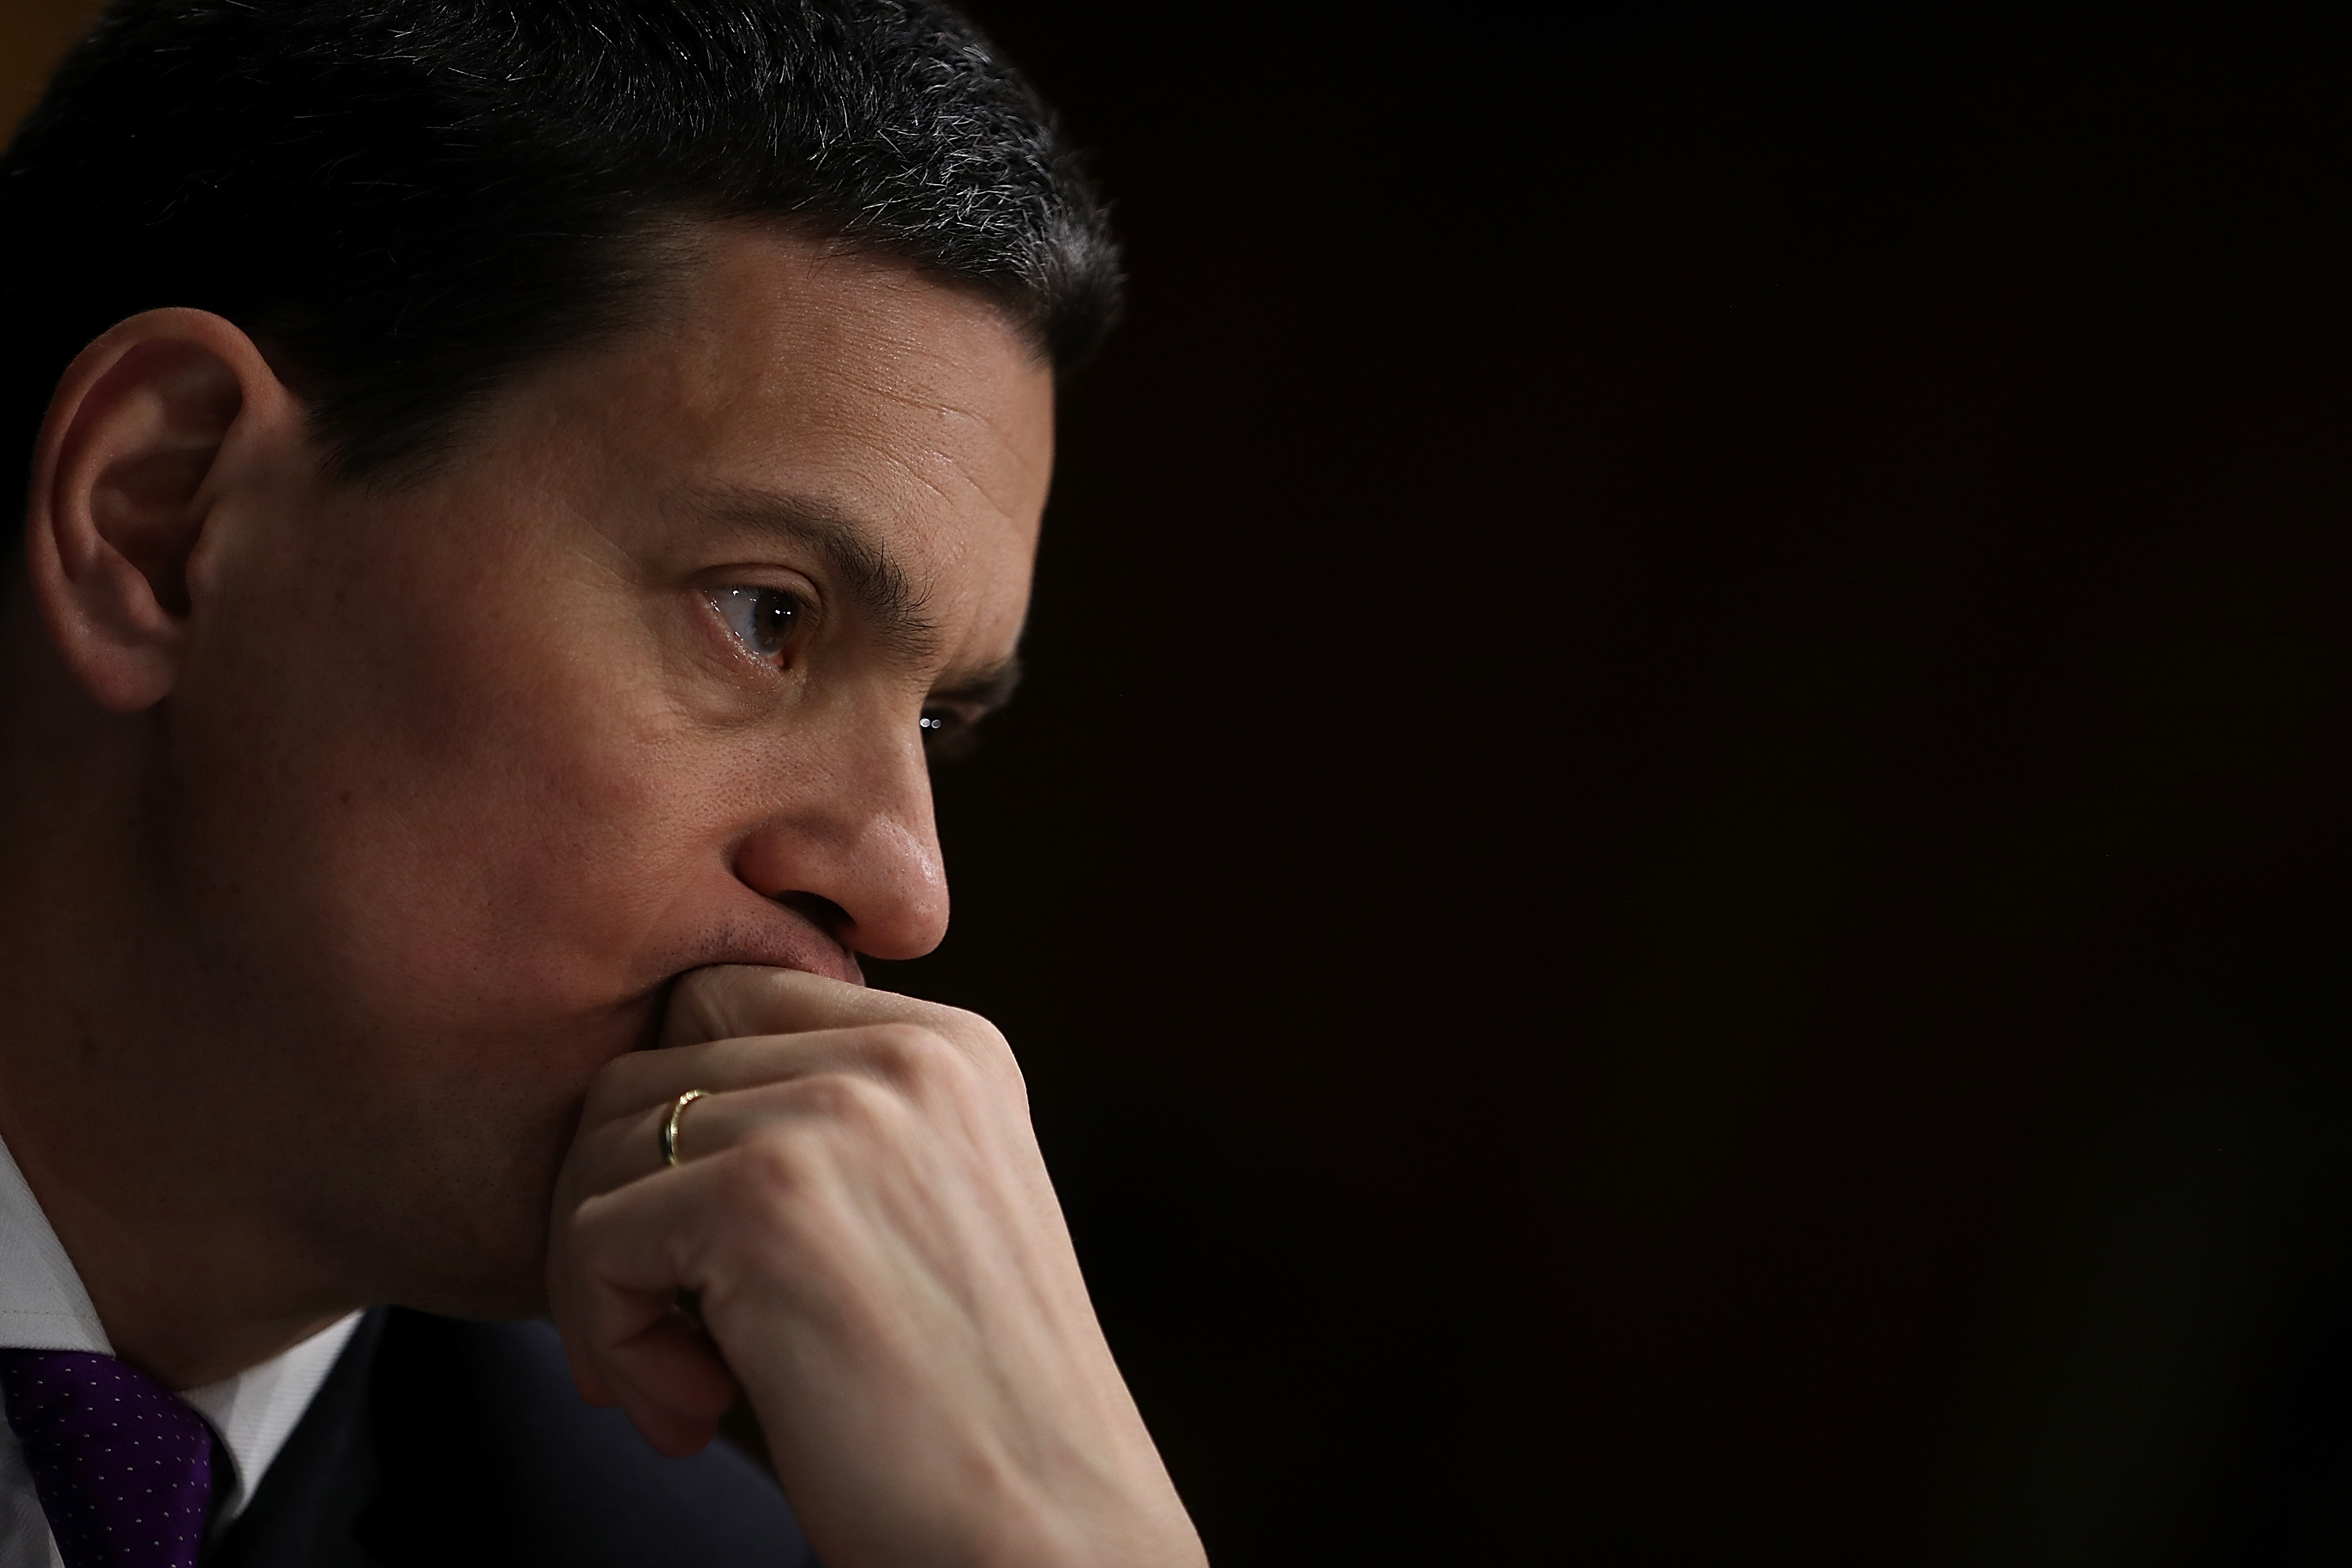 David Miliband looks on during a Senate Foreign Relations Committee meeting in Washington, DC on March 15, 2017.